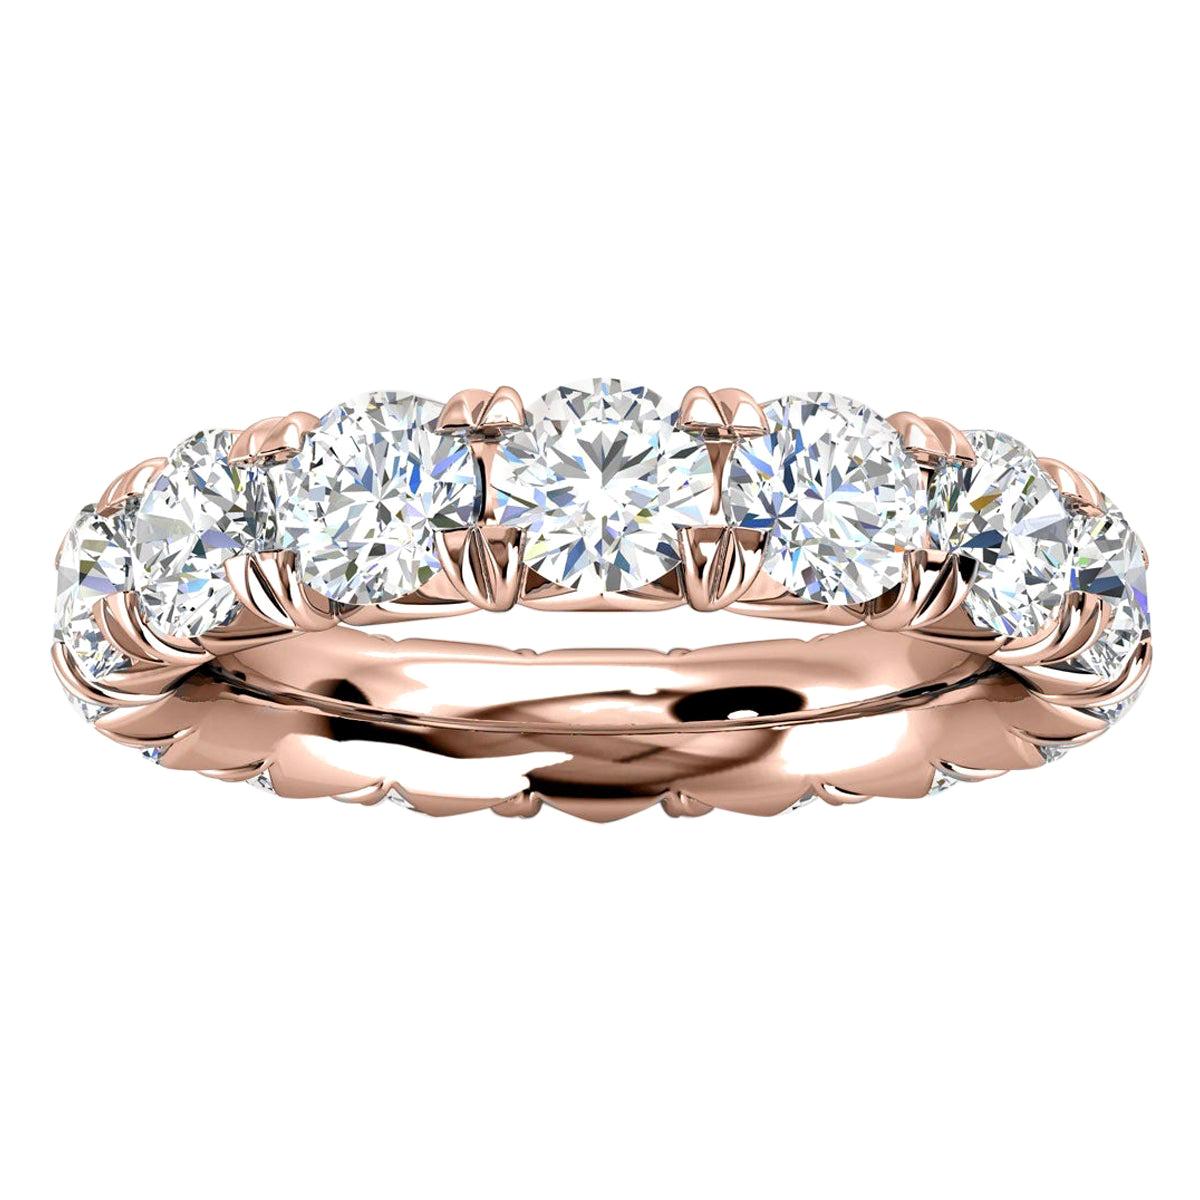 14K Rose Gold Mia French Pave Diamond Eternity Ring '4 Ct. Tw'